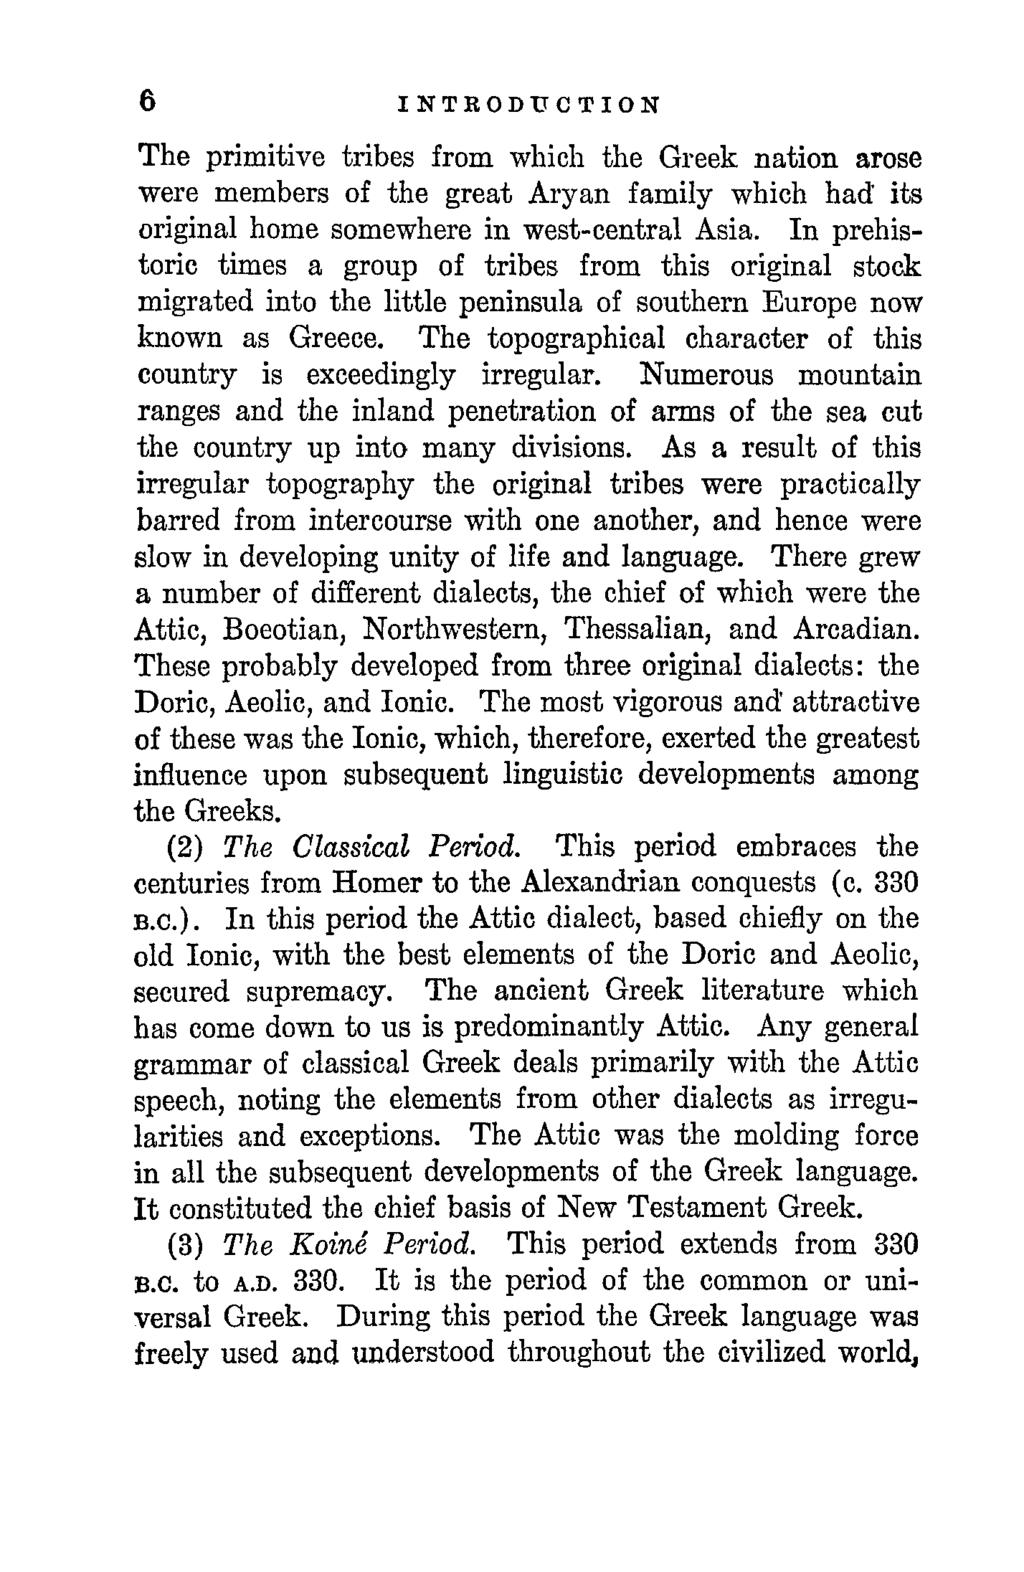 6 INTRODUCTION The primitive tribes from which the Greek nation arose were members of the great Aryan family which had its original home somewhere in west-central Asia.